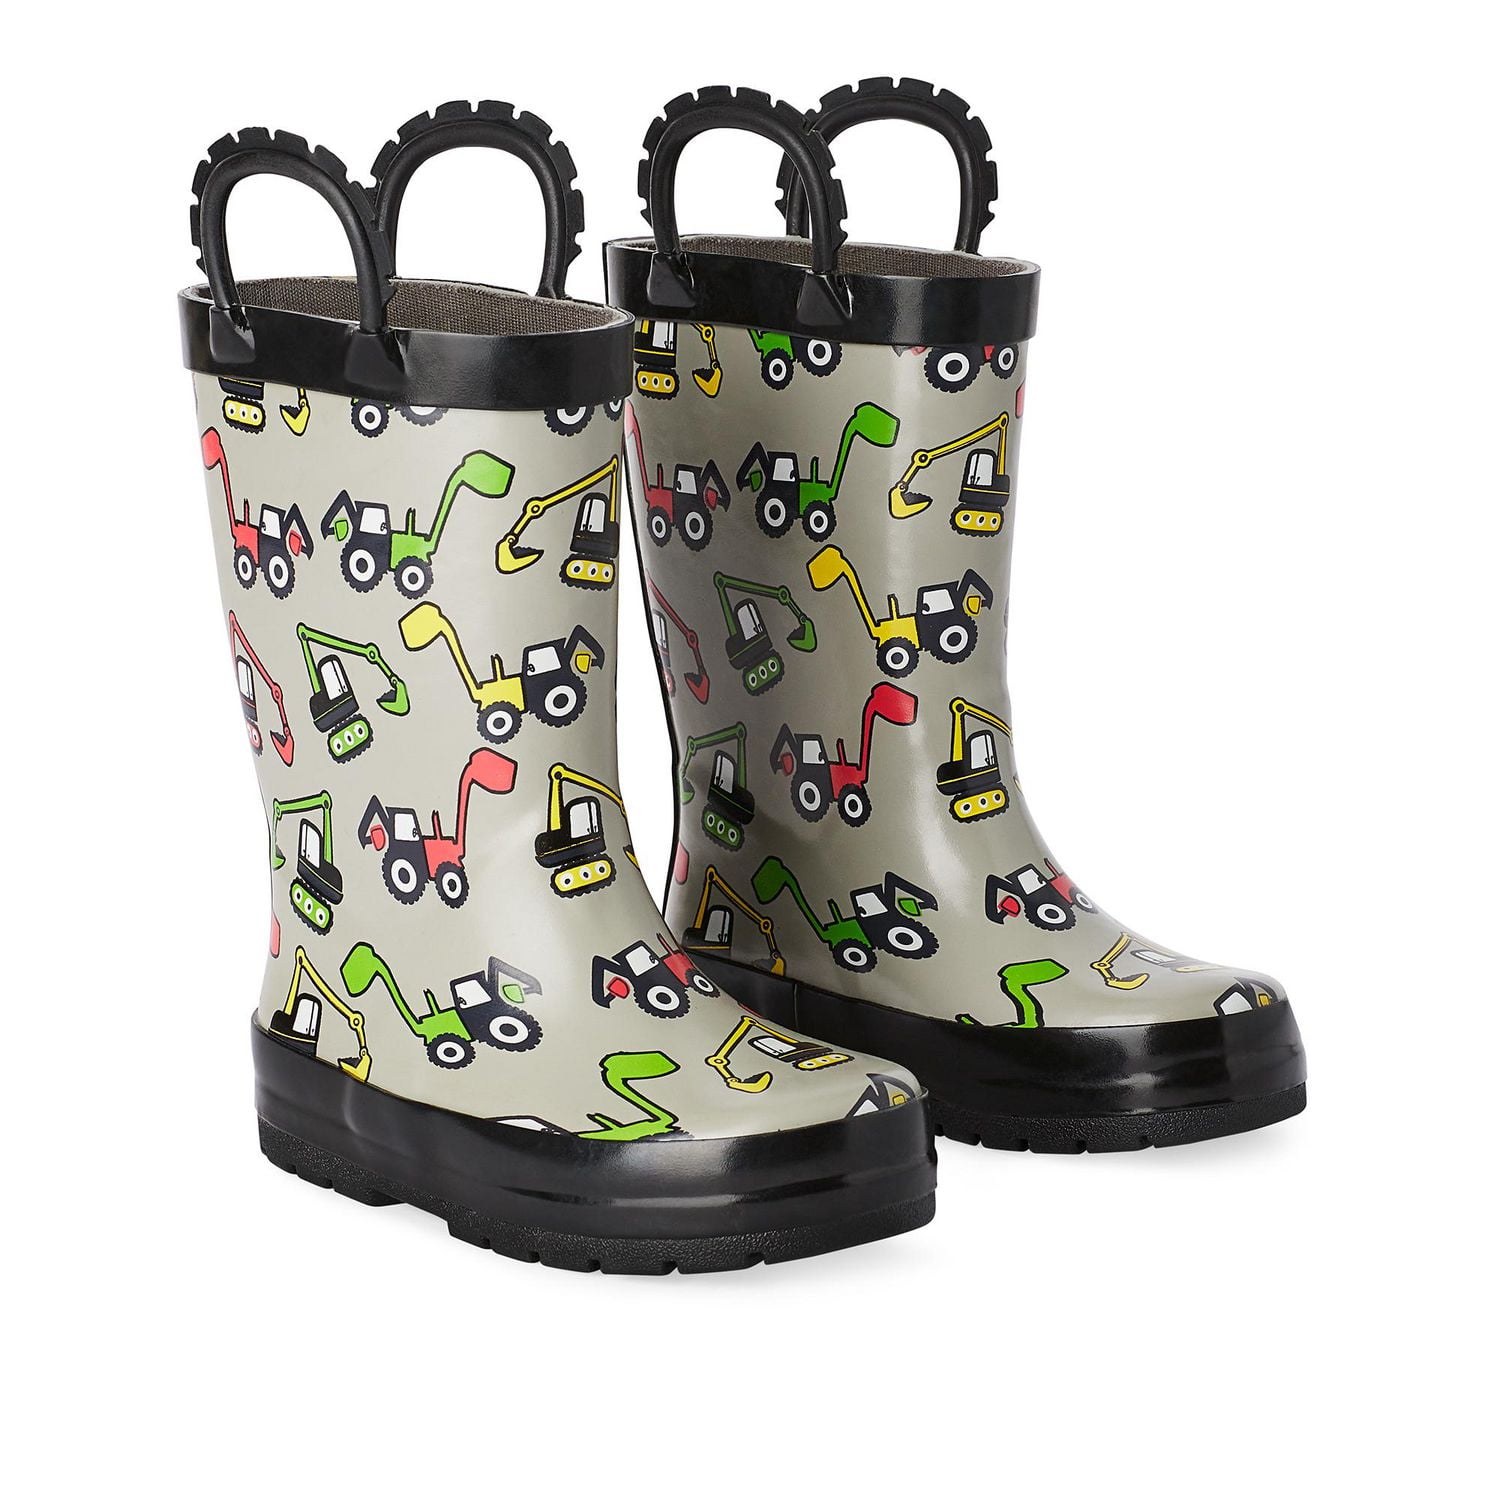 George Toddlers' Unisex Digger Rain Boots